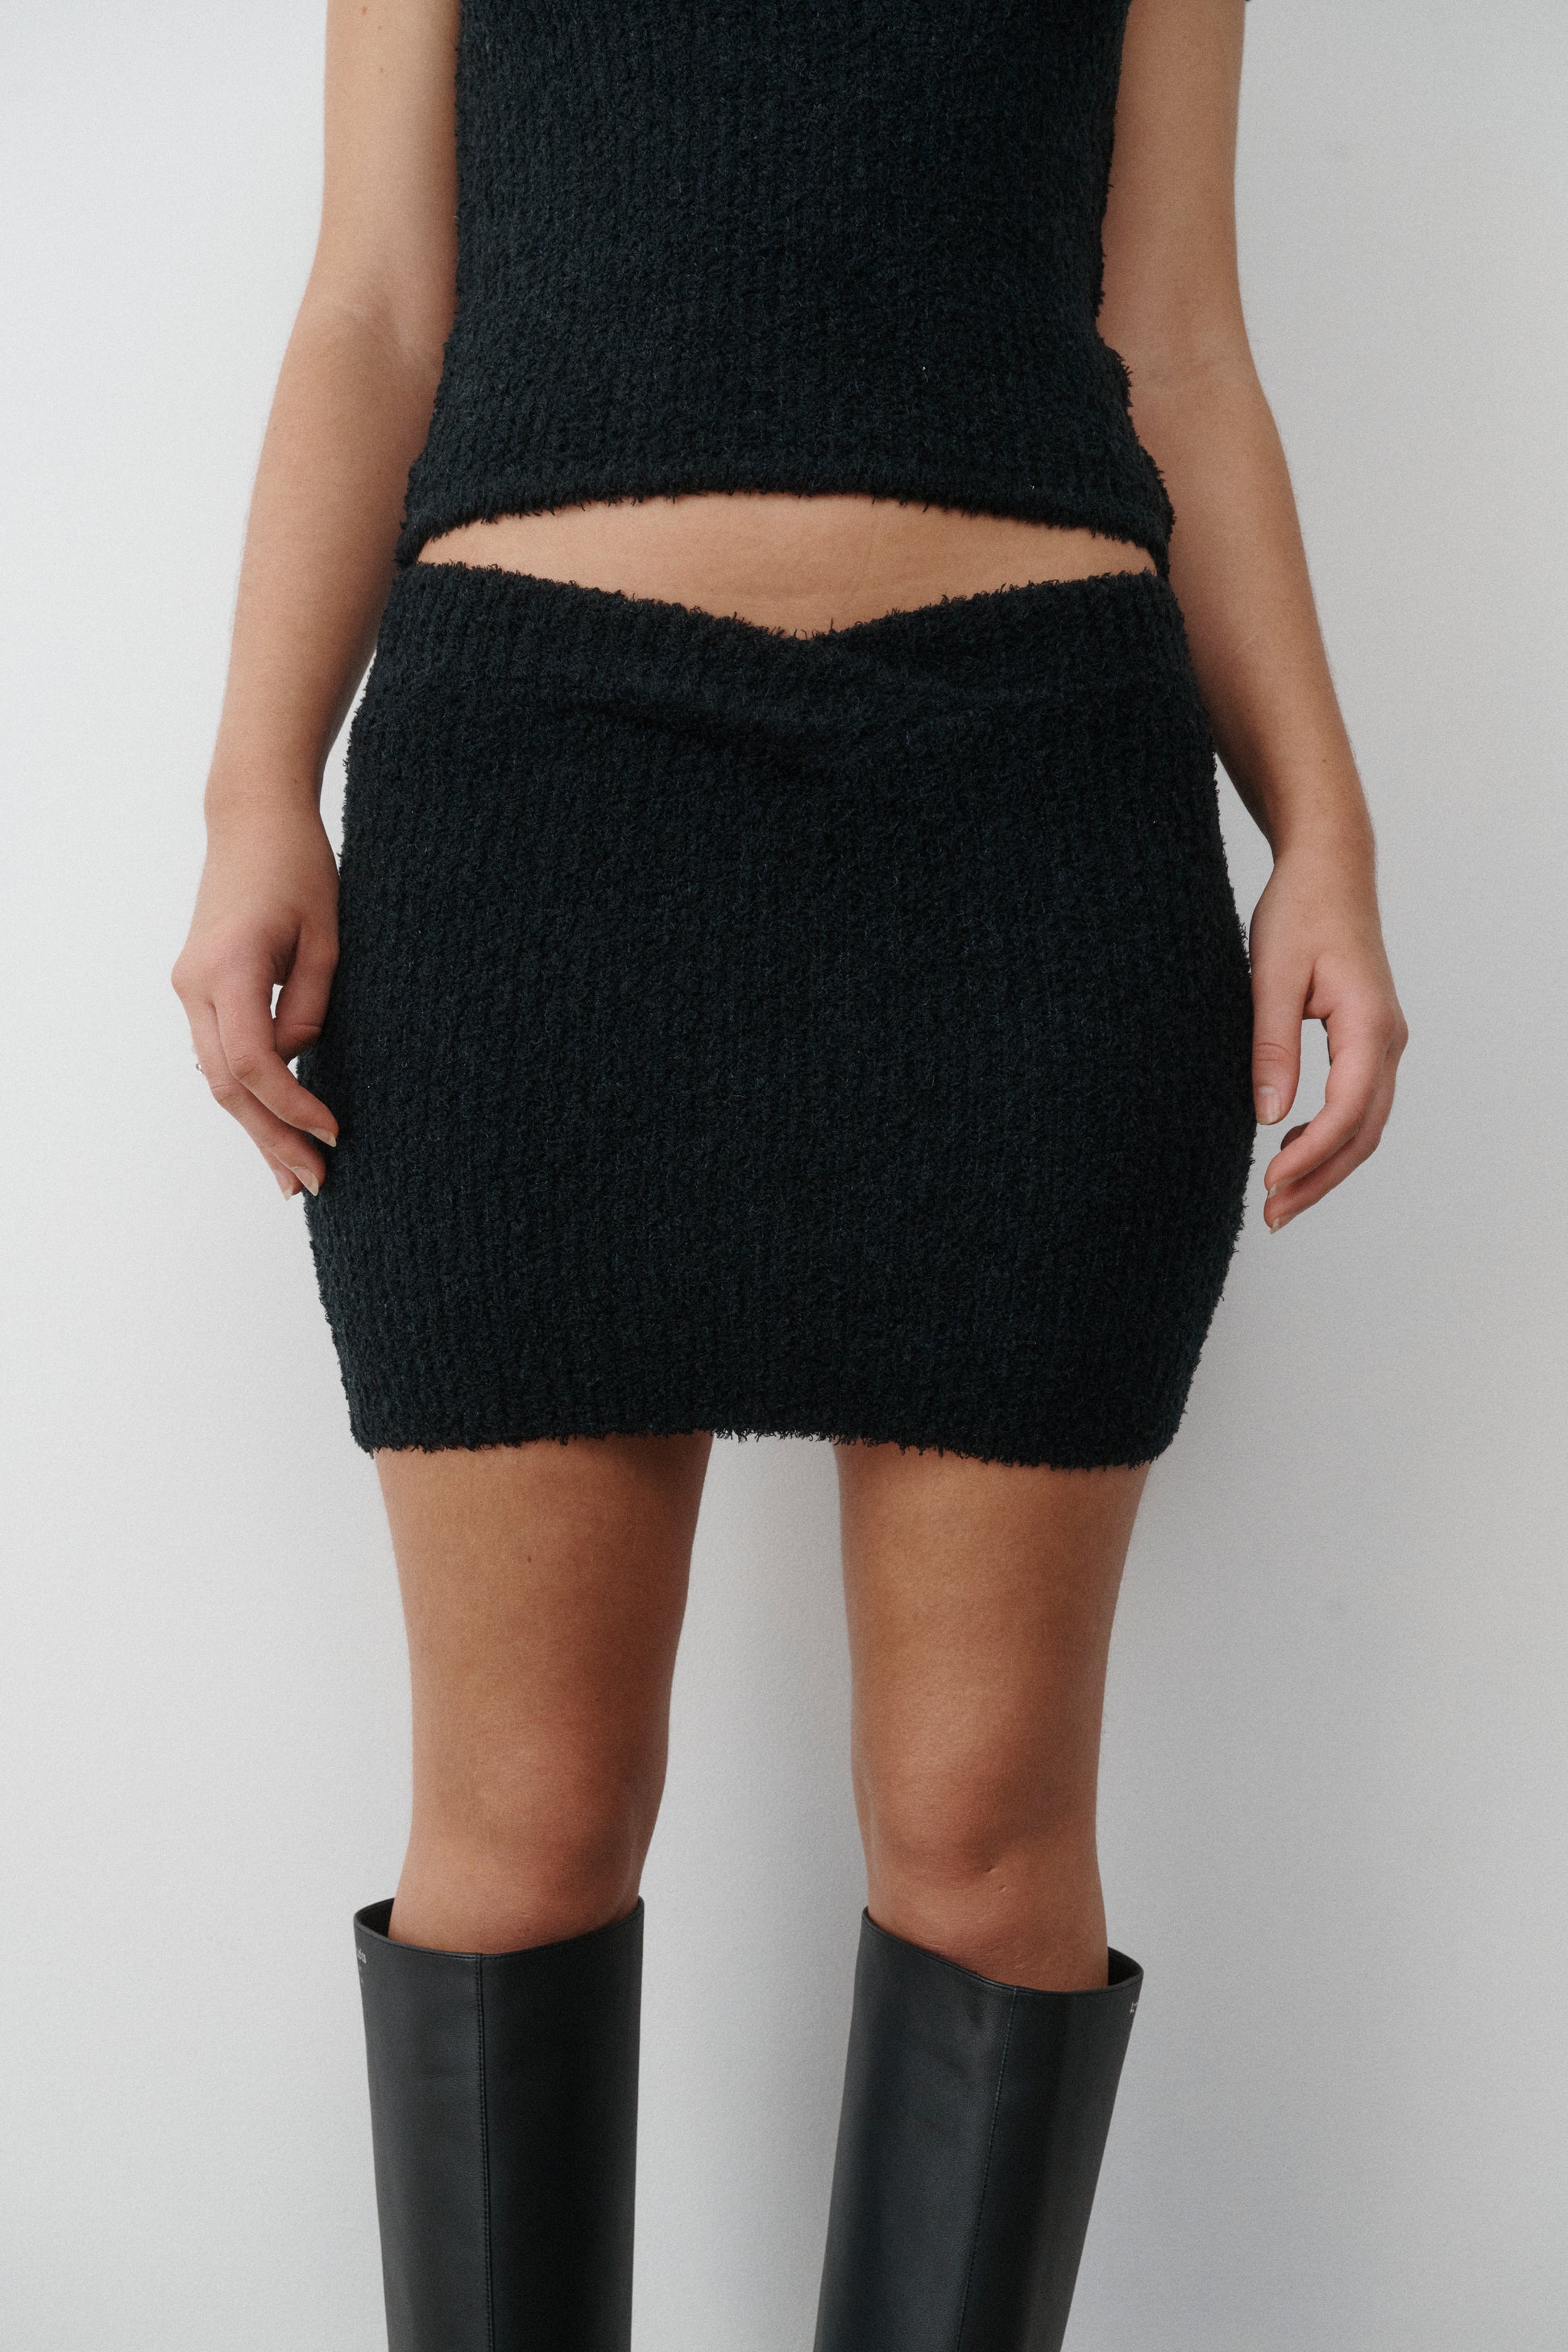 Muse The Label Maru black mini skirt knitted wool stretch textured